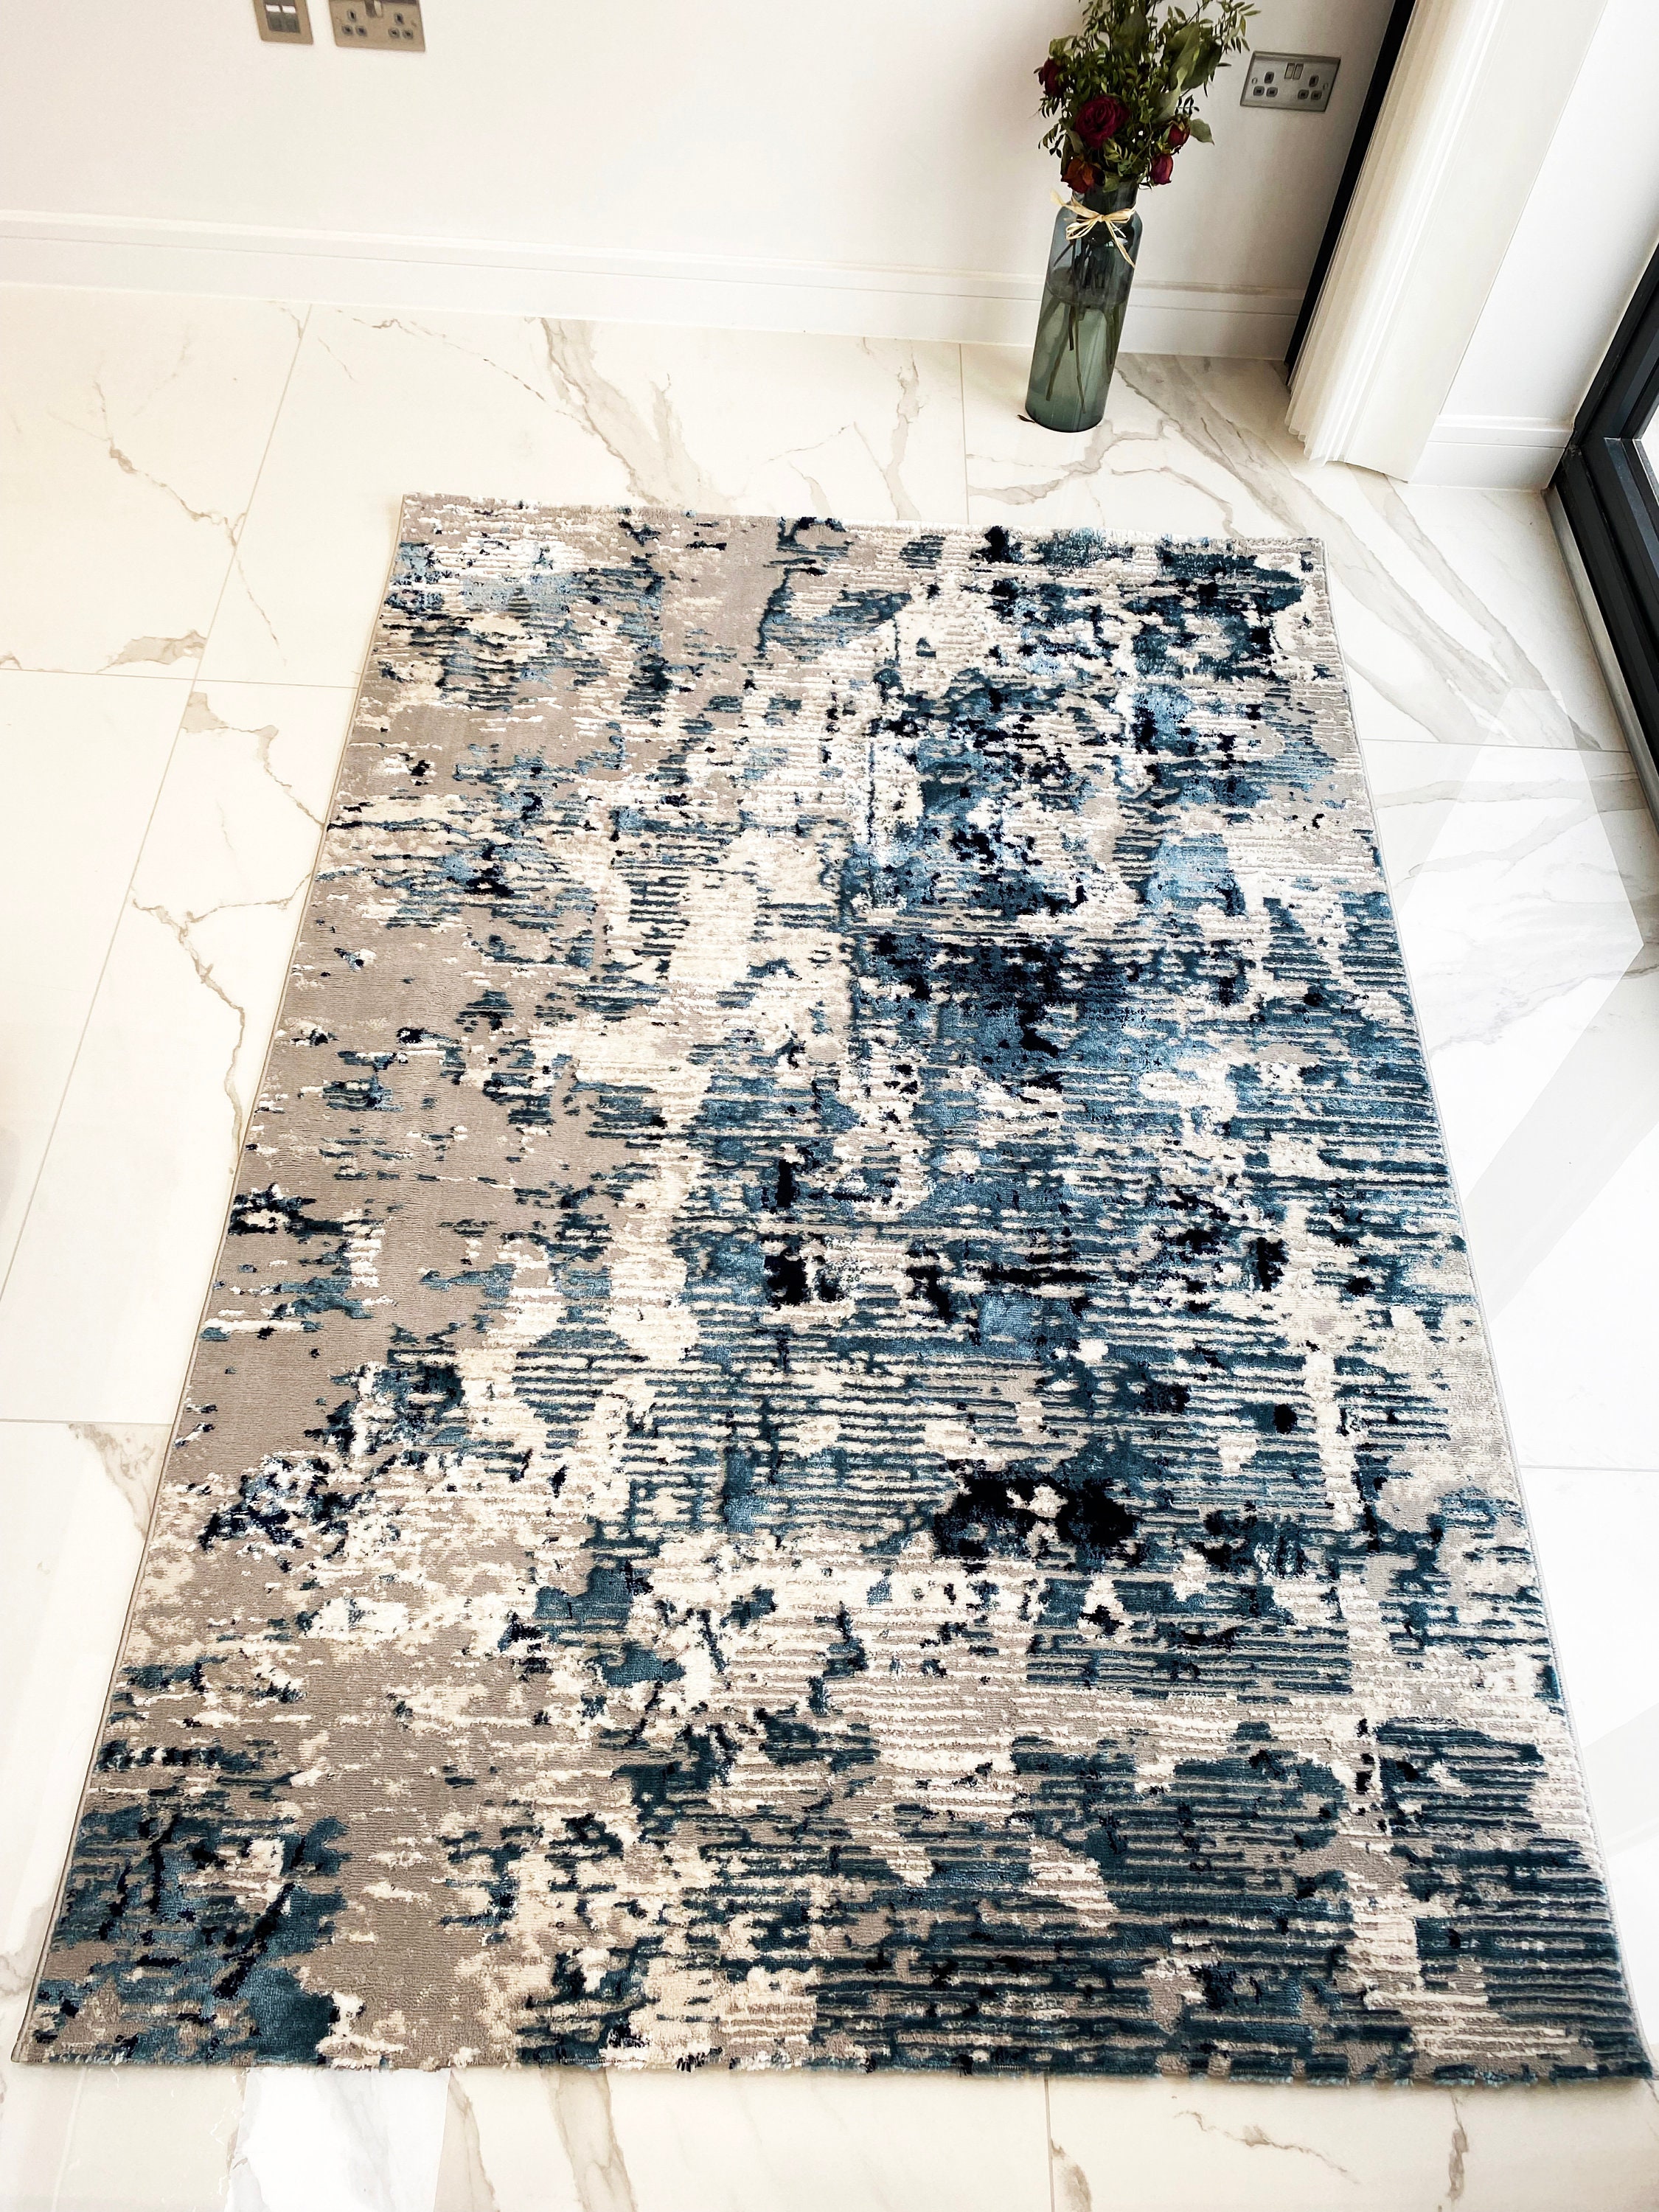 BLUE / GREY Modern Abstract Small Extra Large Floor Carpets Rugs Mats  Distressed Carpet for All Area, Bedrooms, Living Room ,kitchens. 